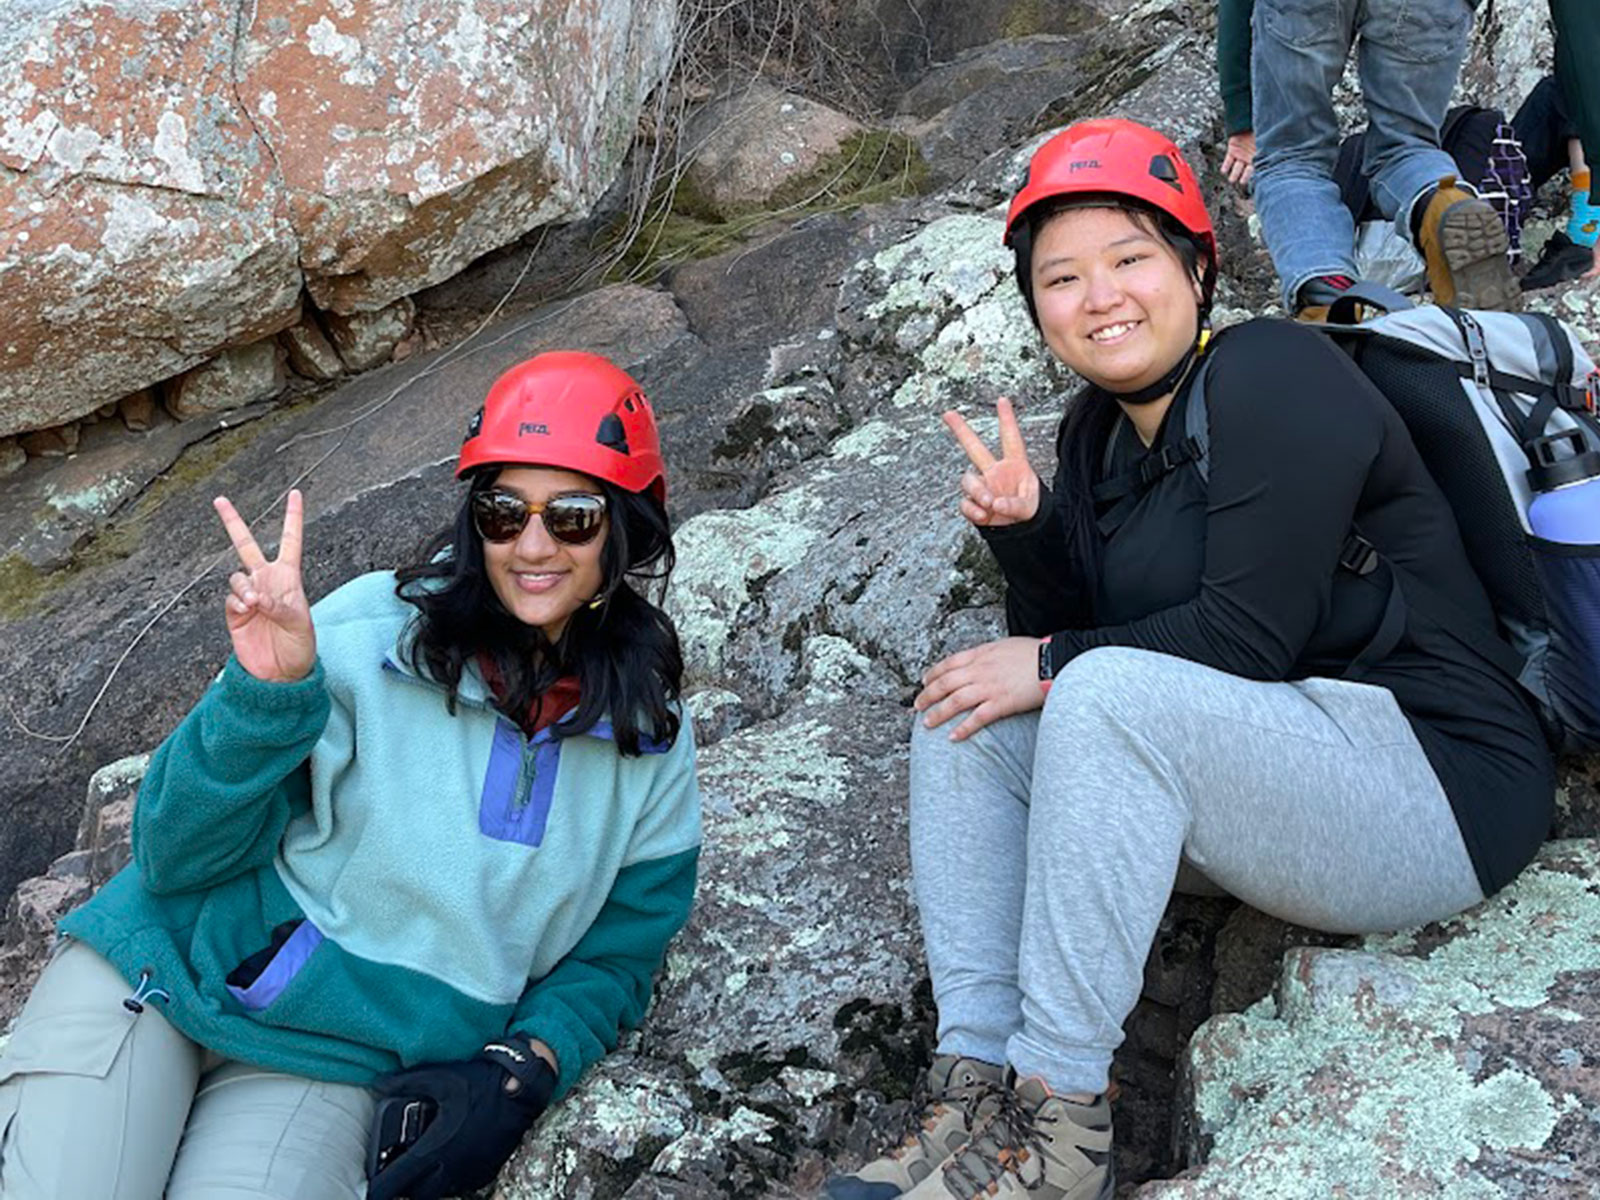 Two females climbing side of mountain pause while smiling for photo